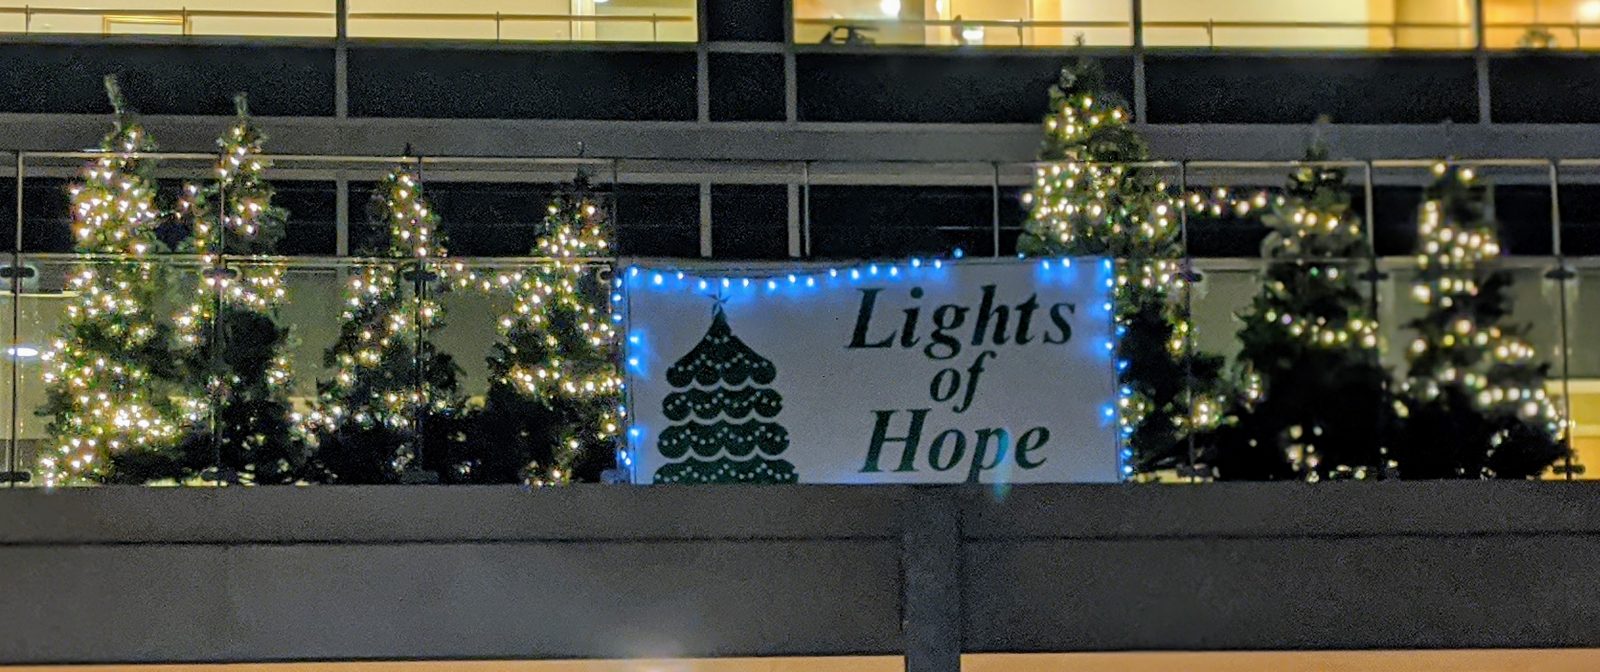 Lights of Hope shines at St. Joseph’s Continuing Care Centre